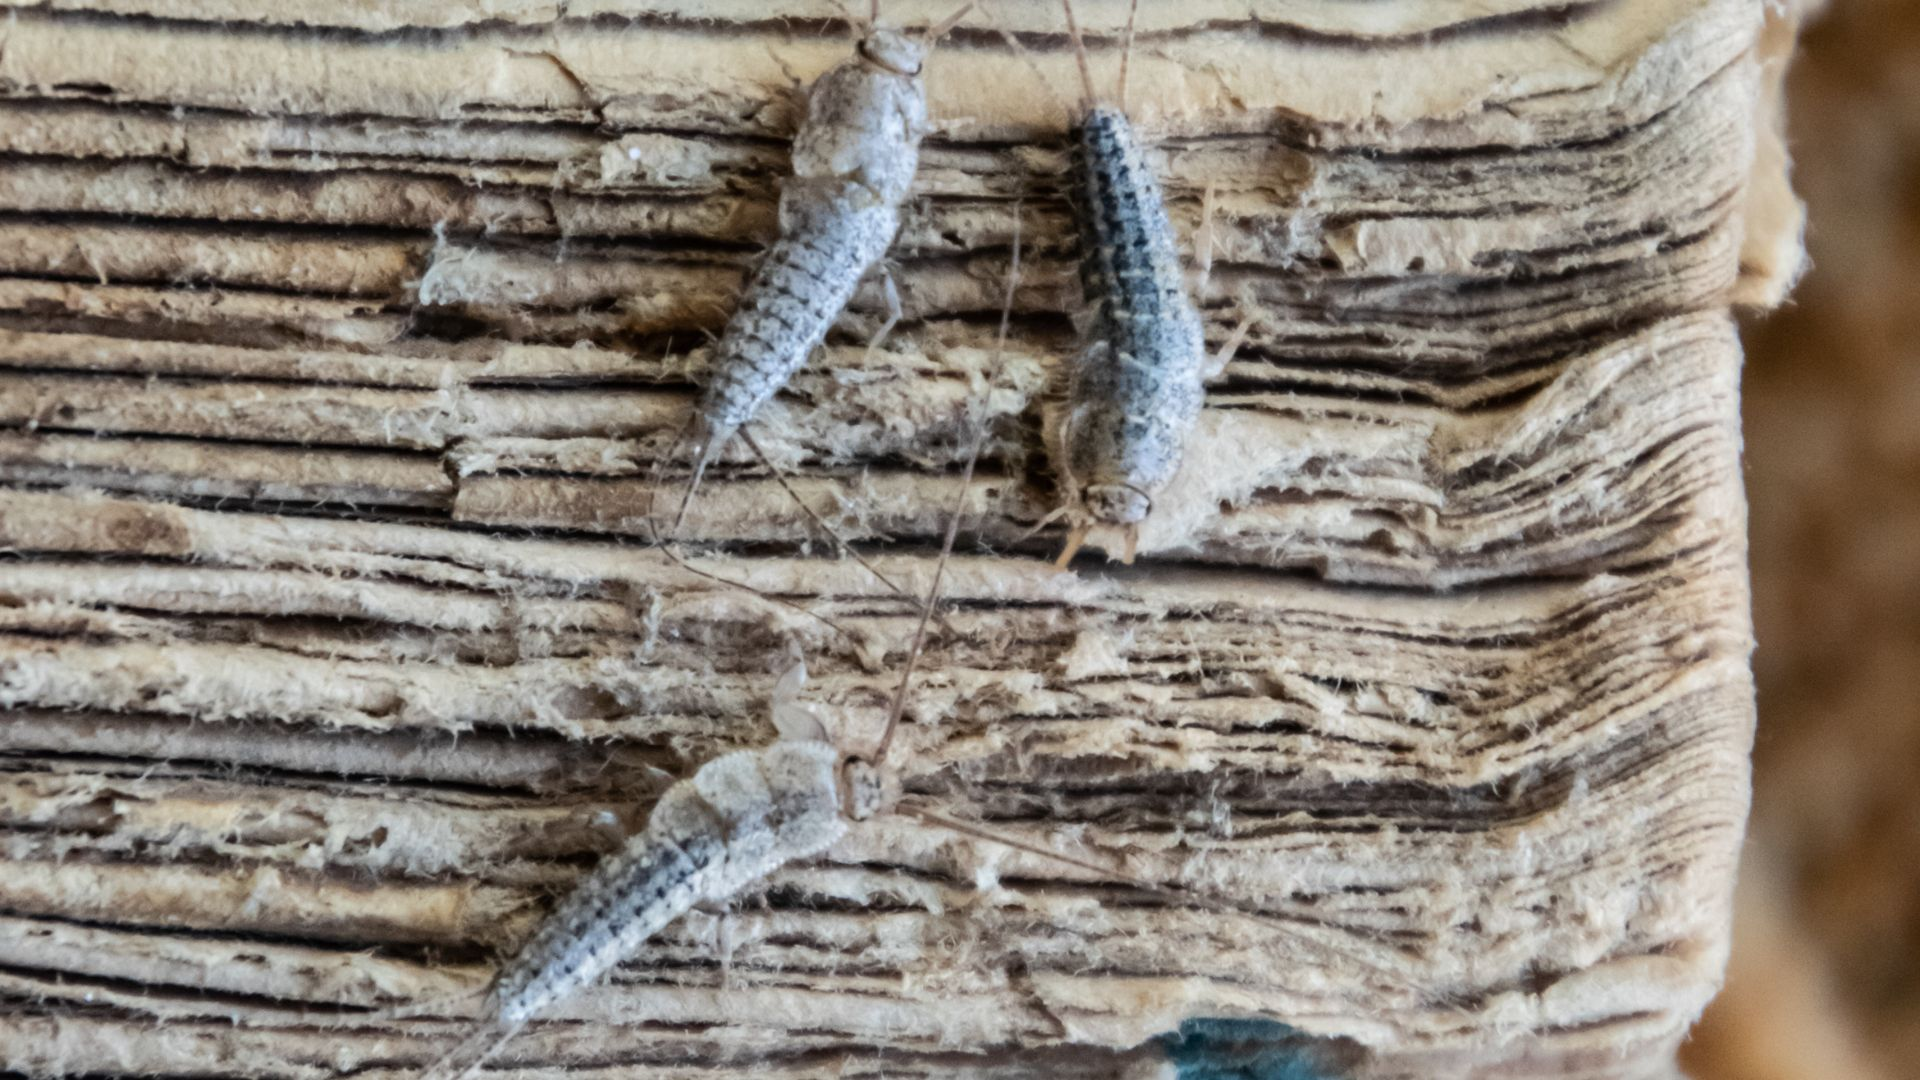 An image of several silverfish eating the pages of an old book.